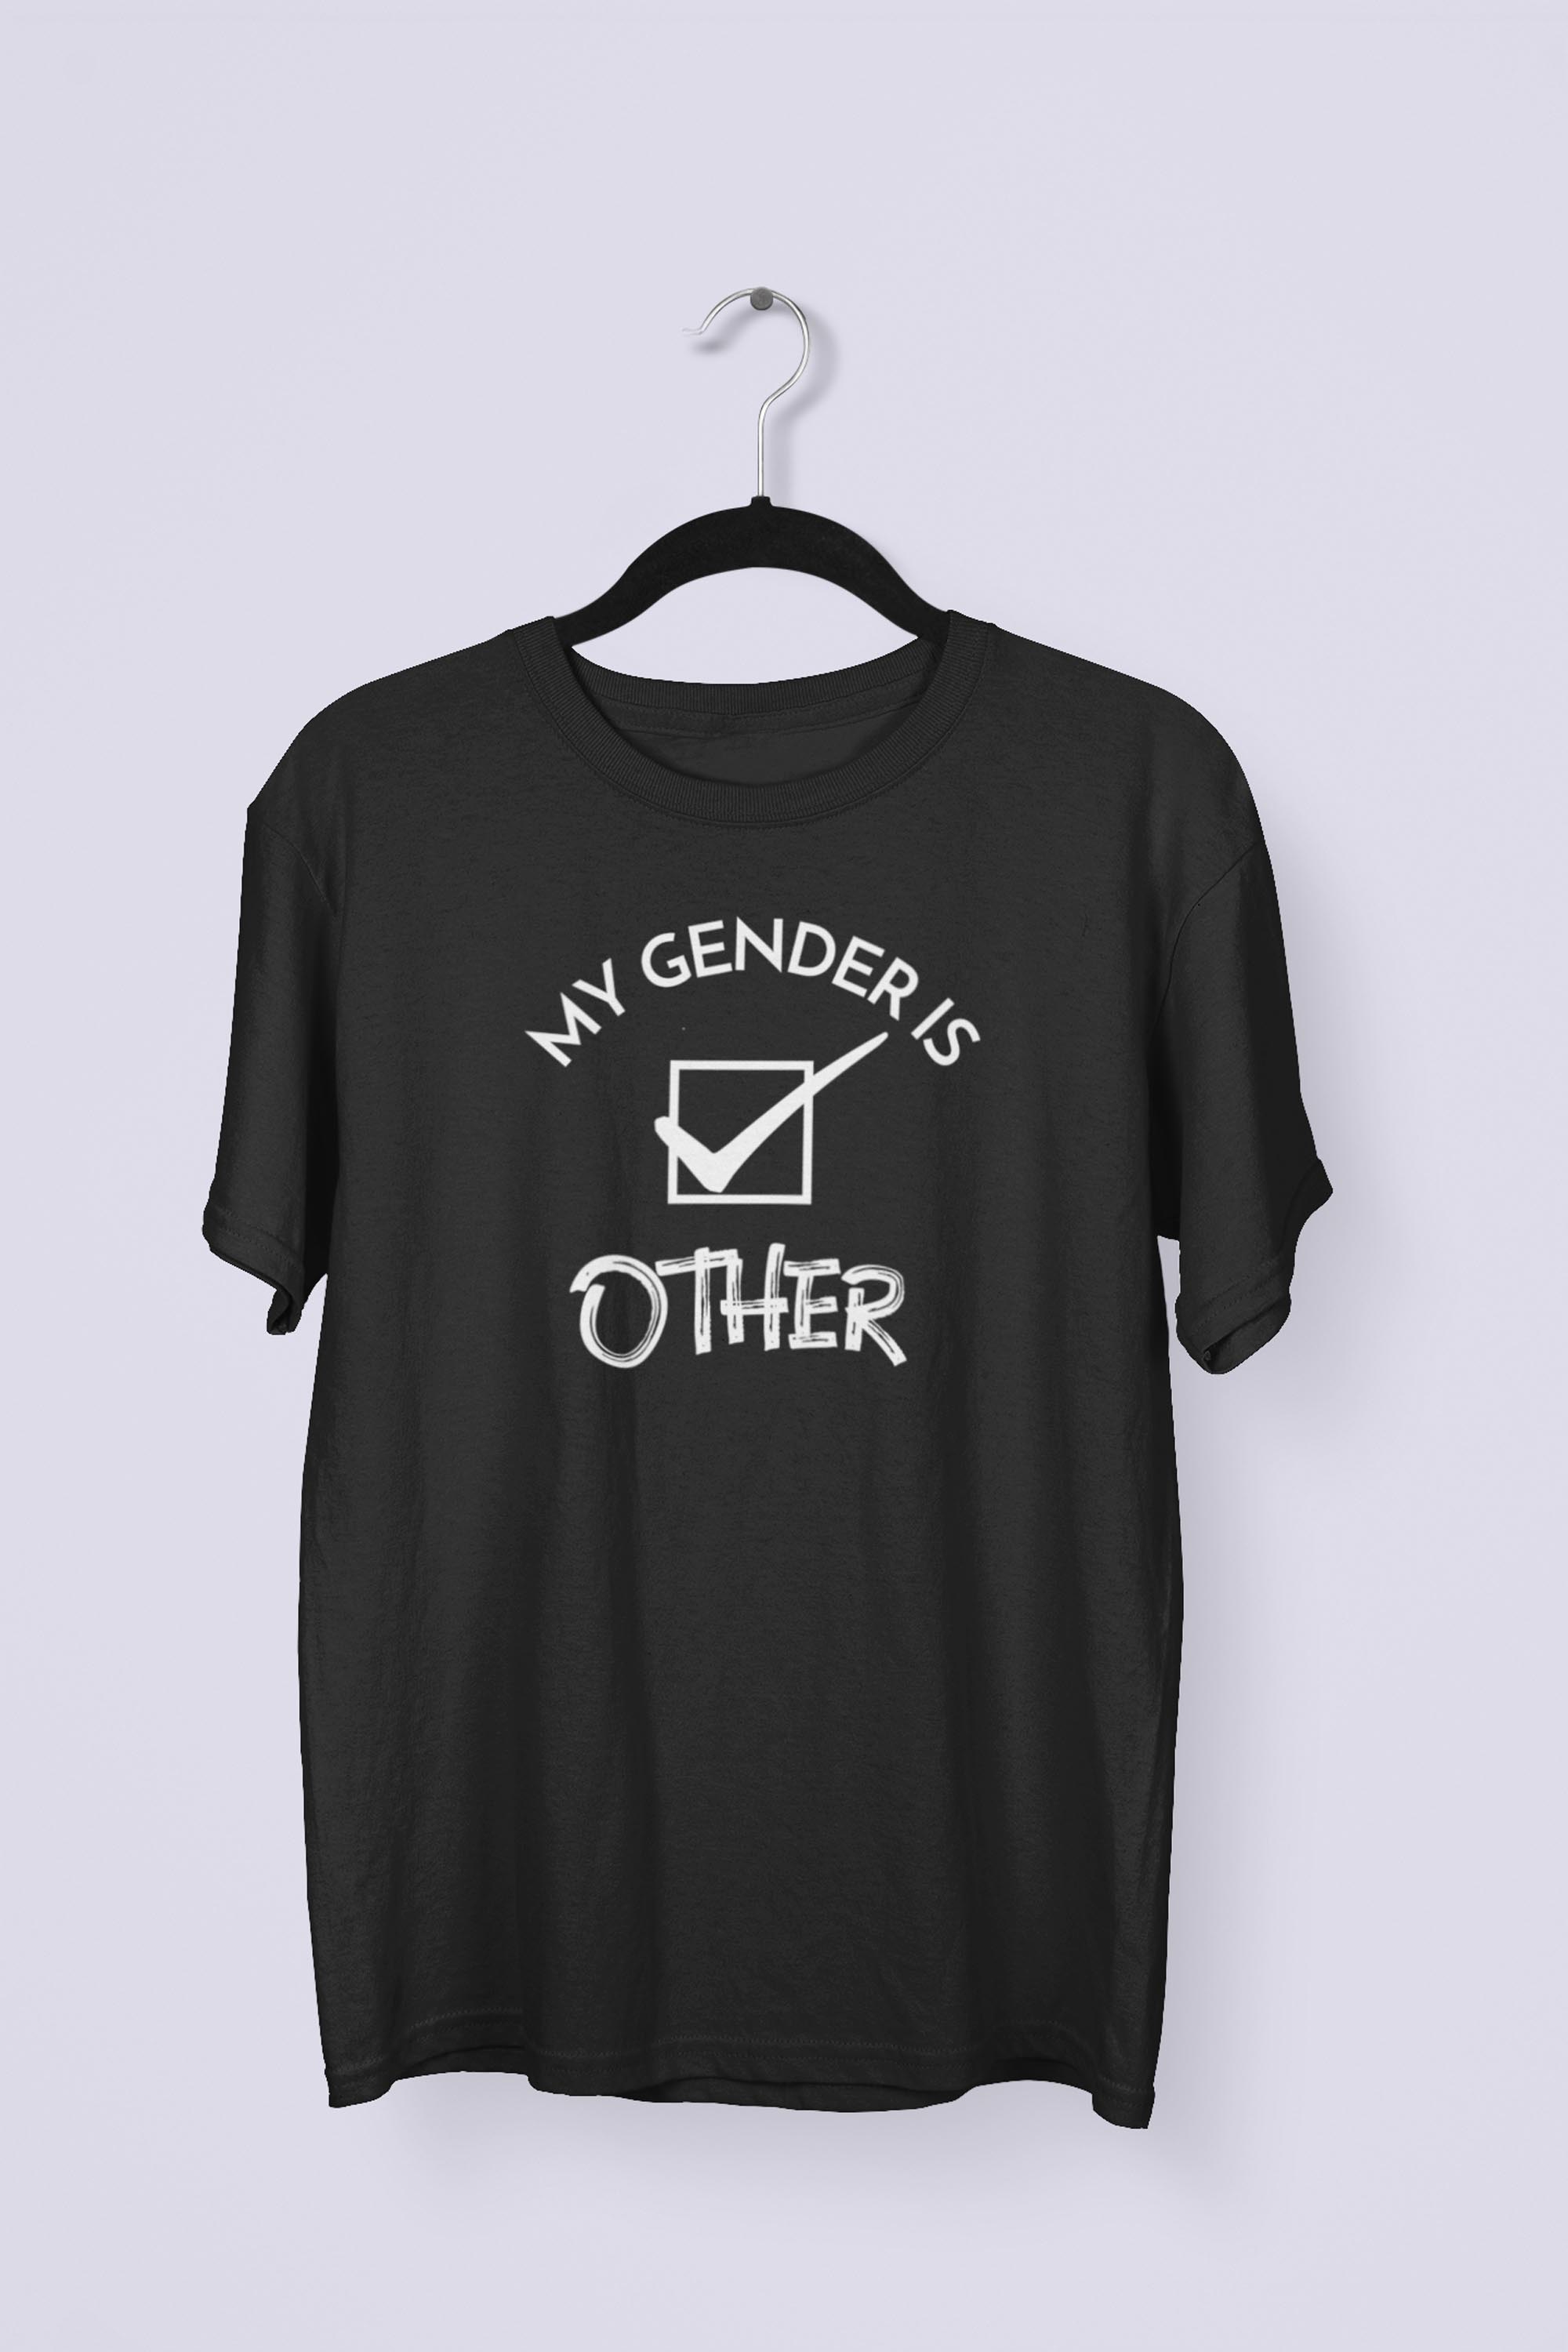 My Gender is Other T-shirt - Black